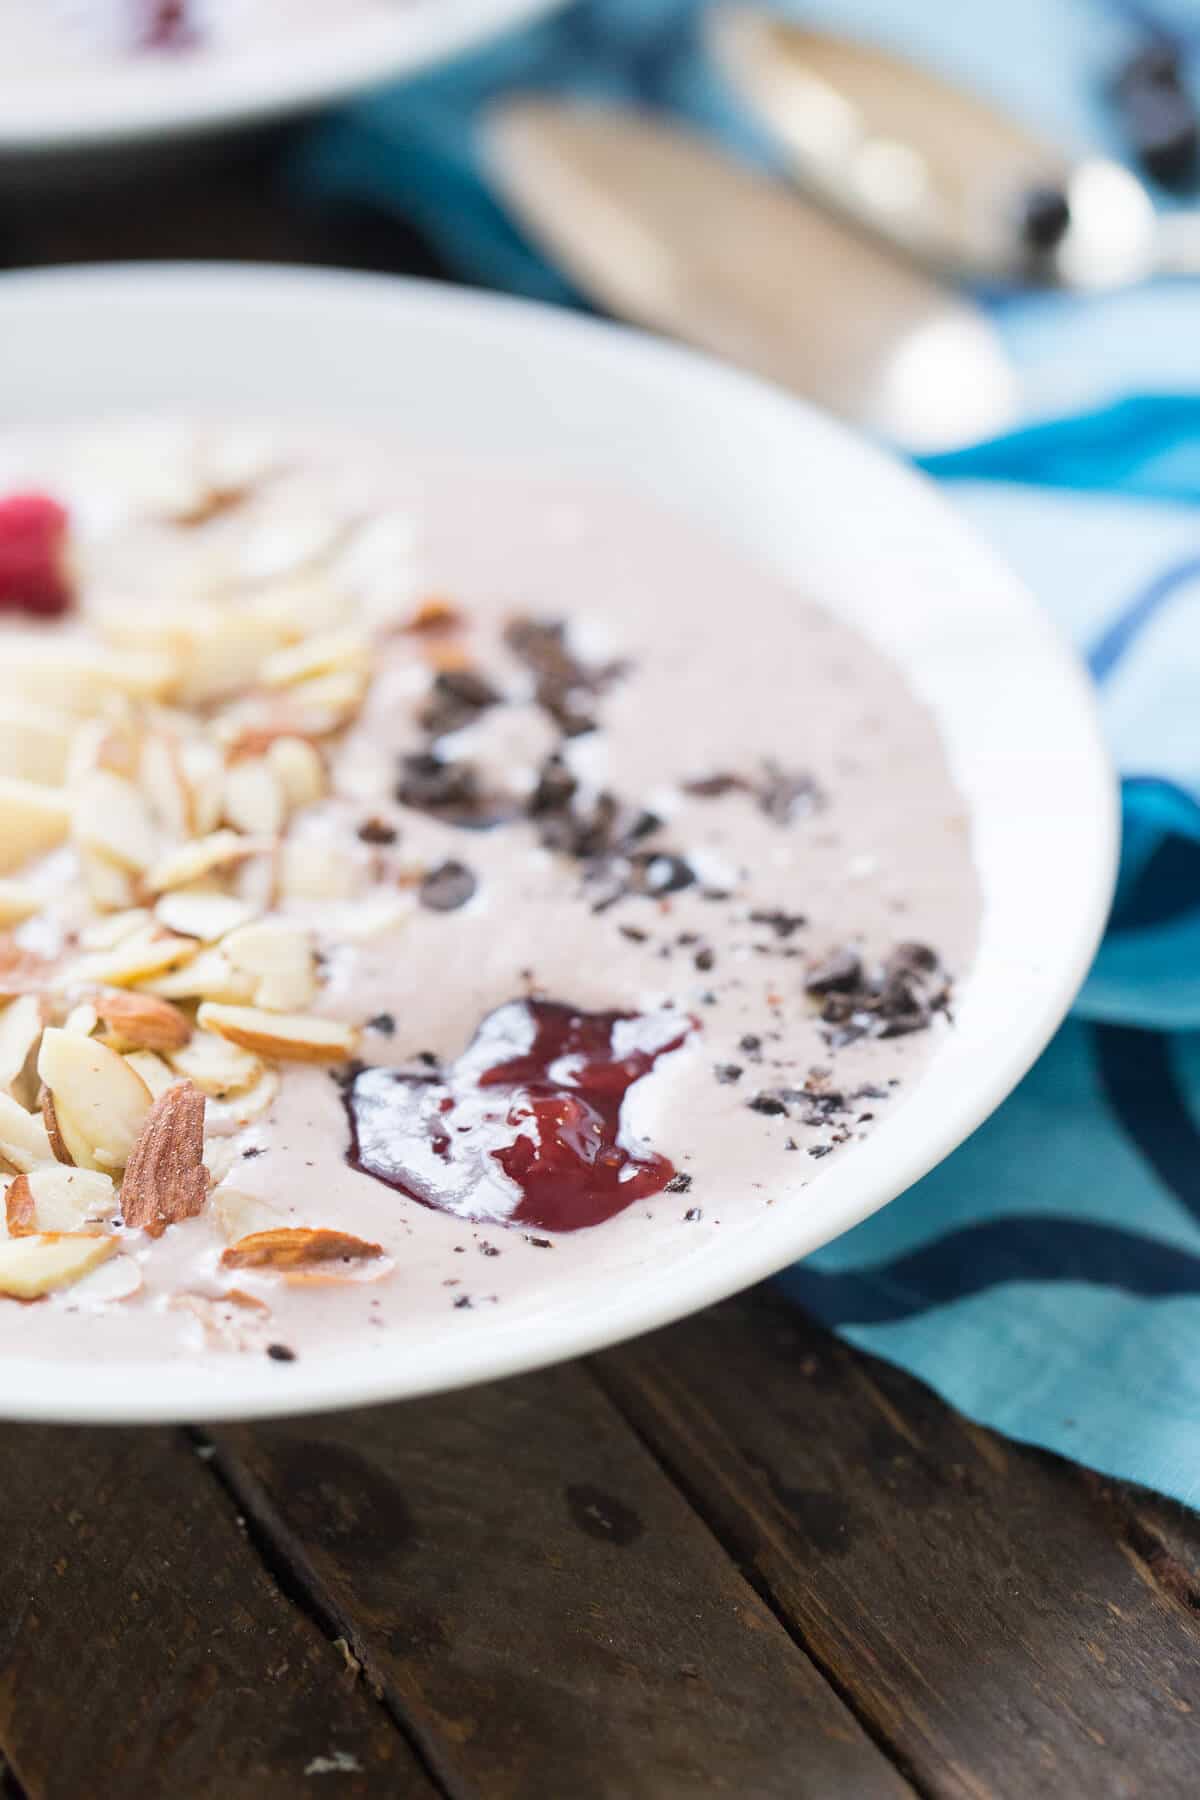 You need this smoothie bowl in your life! It is full of fresh flavors and a hint of mocha. It is such an easy recipe for breakfast!